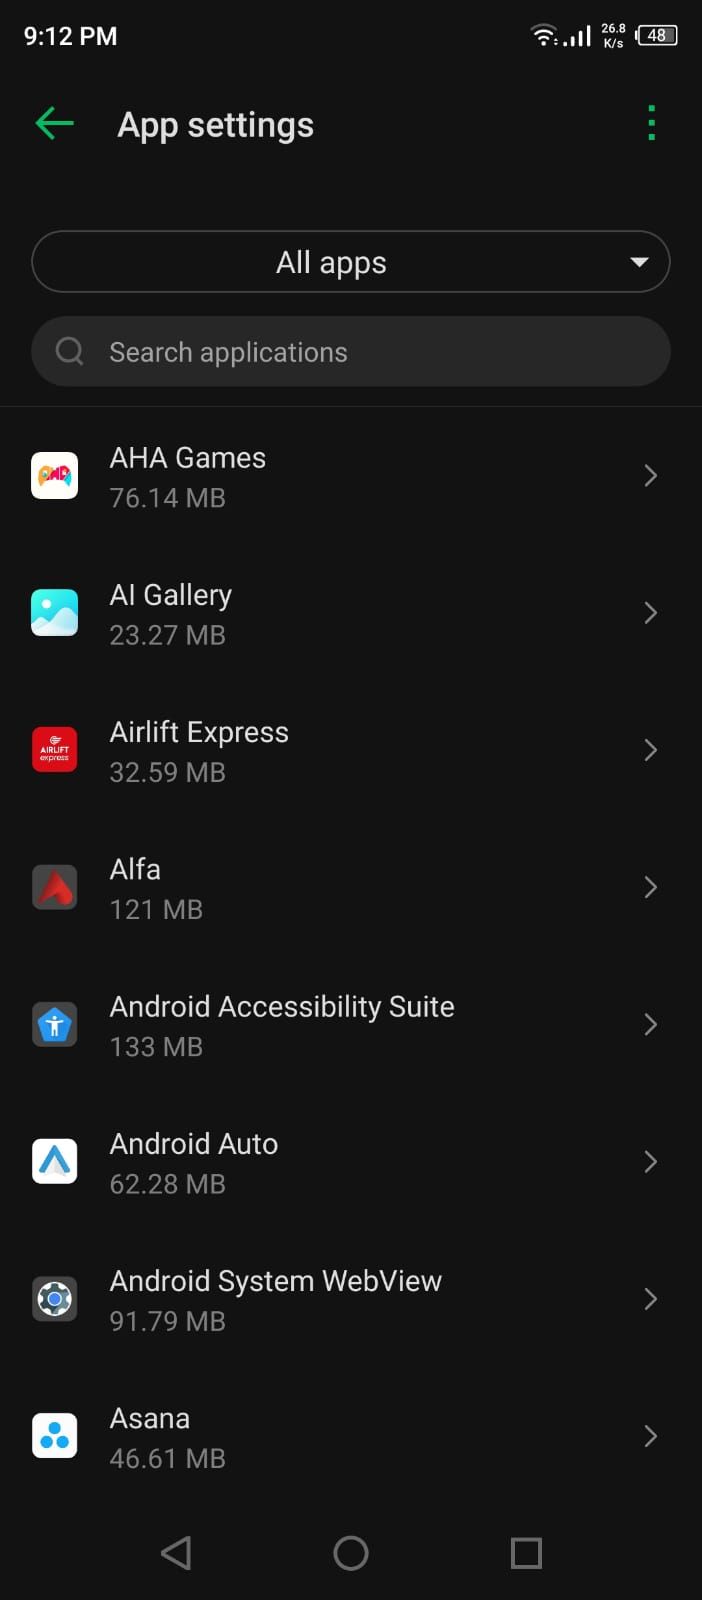 List of Apps in the App Management Menu